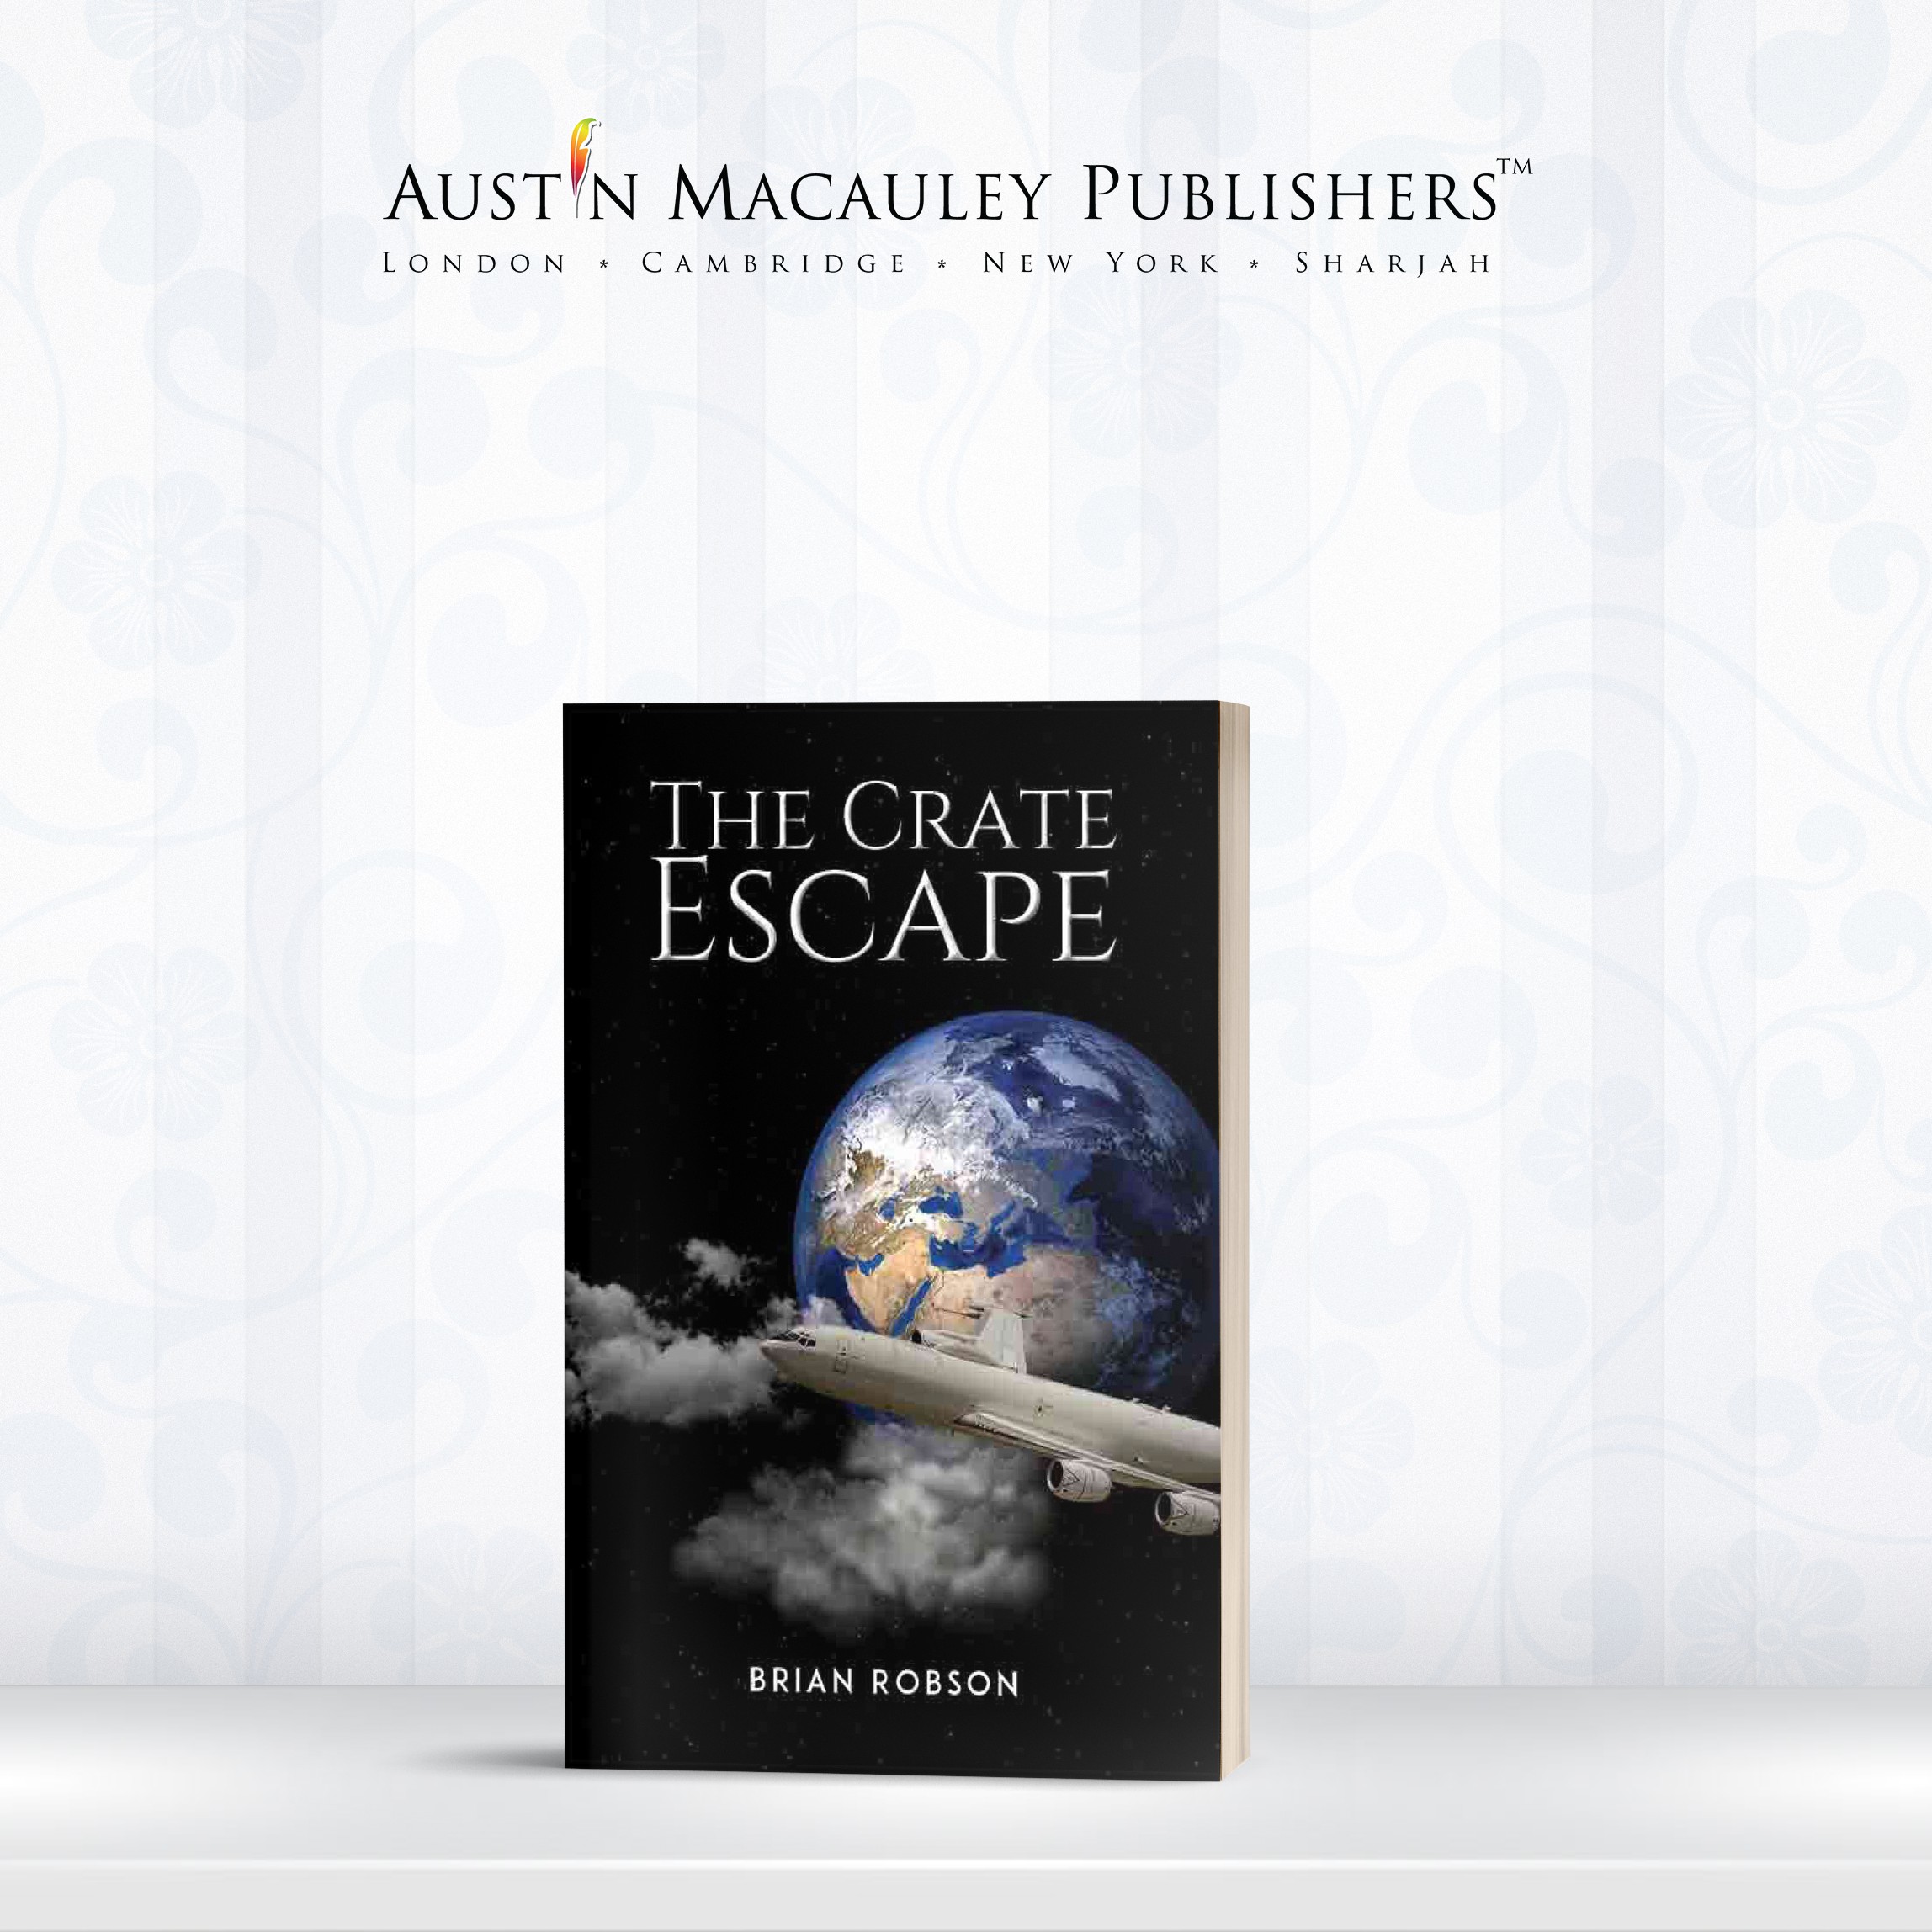 Talk Radio Europe Interviews Brian Robson – Author of the Non-Fiction Adventure Book, The Crate Escape